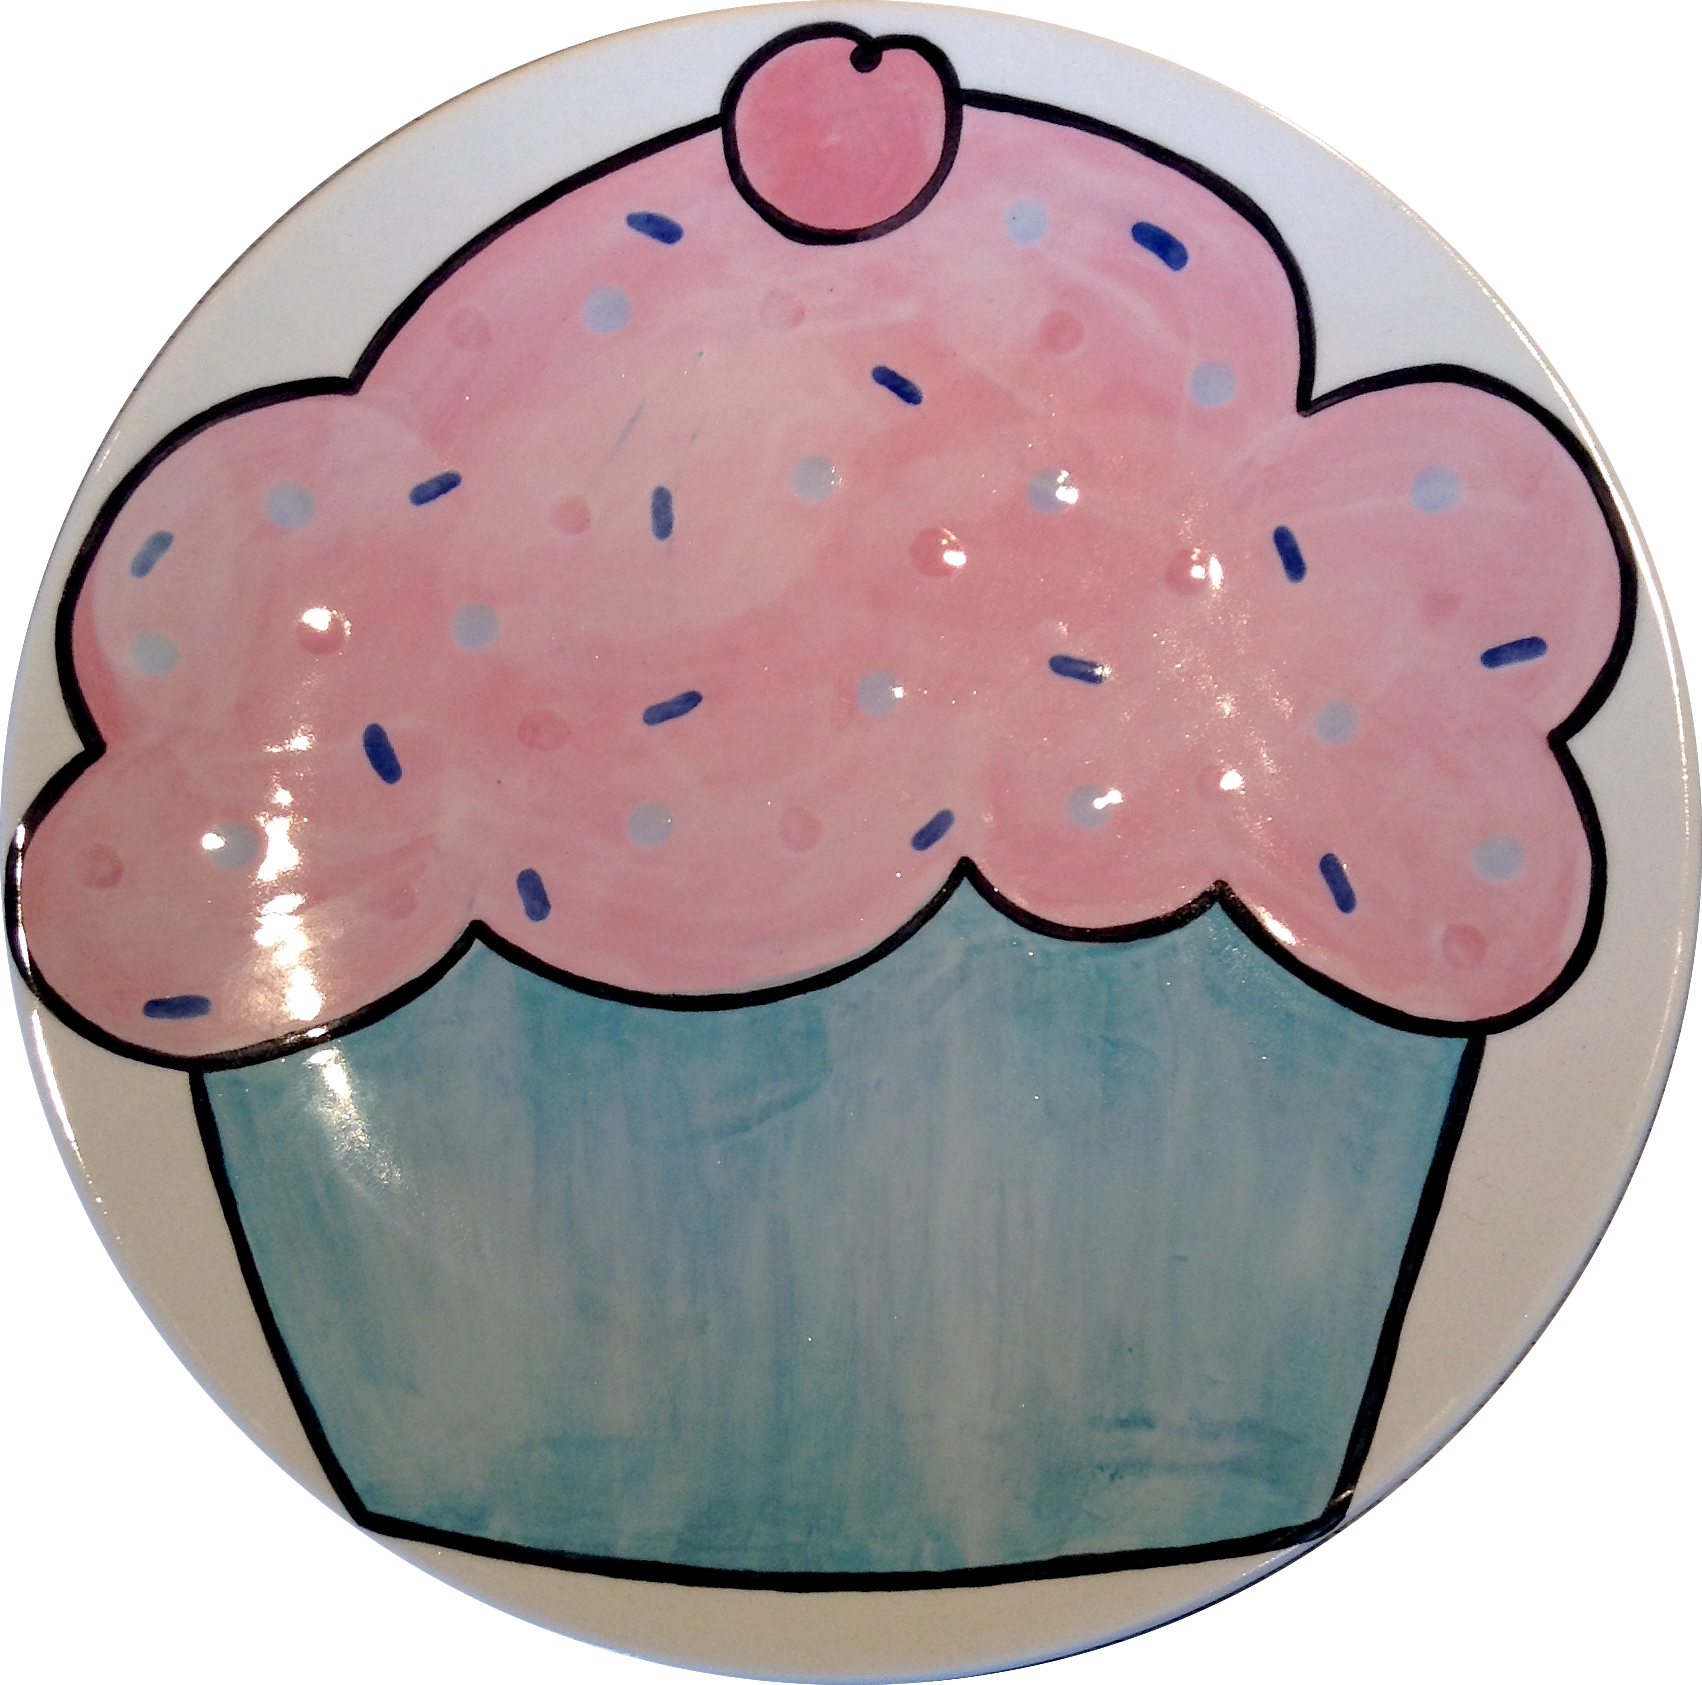 Plate clipart clean plate. Giant cupcake paint your